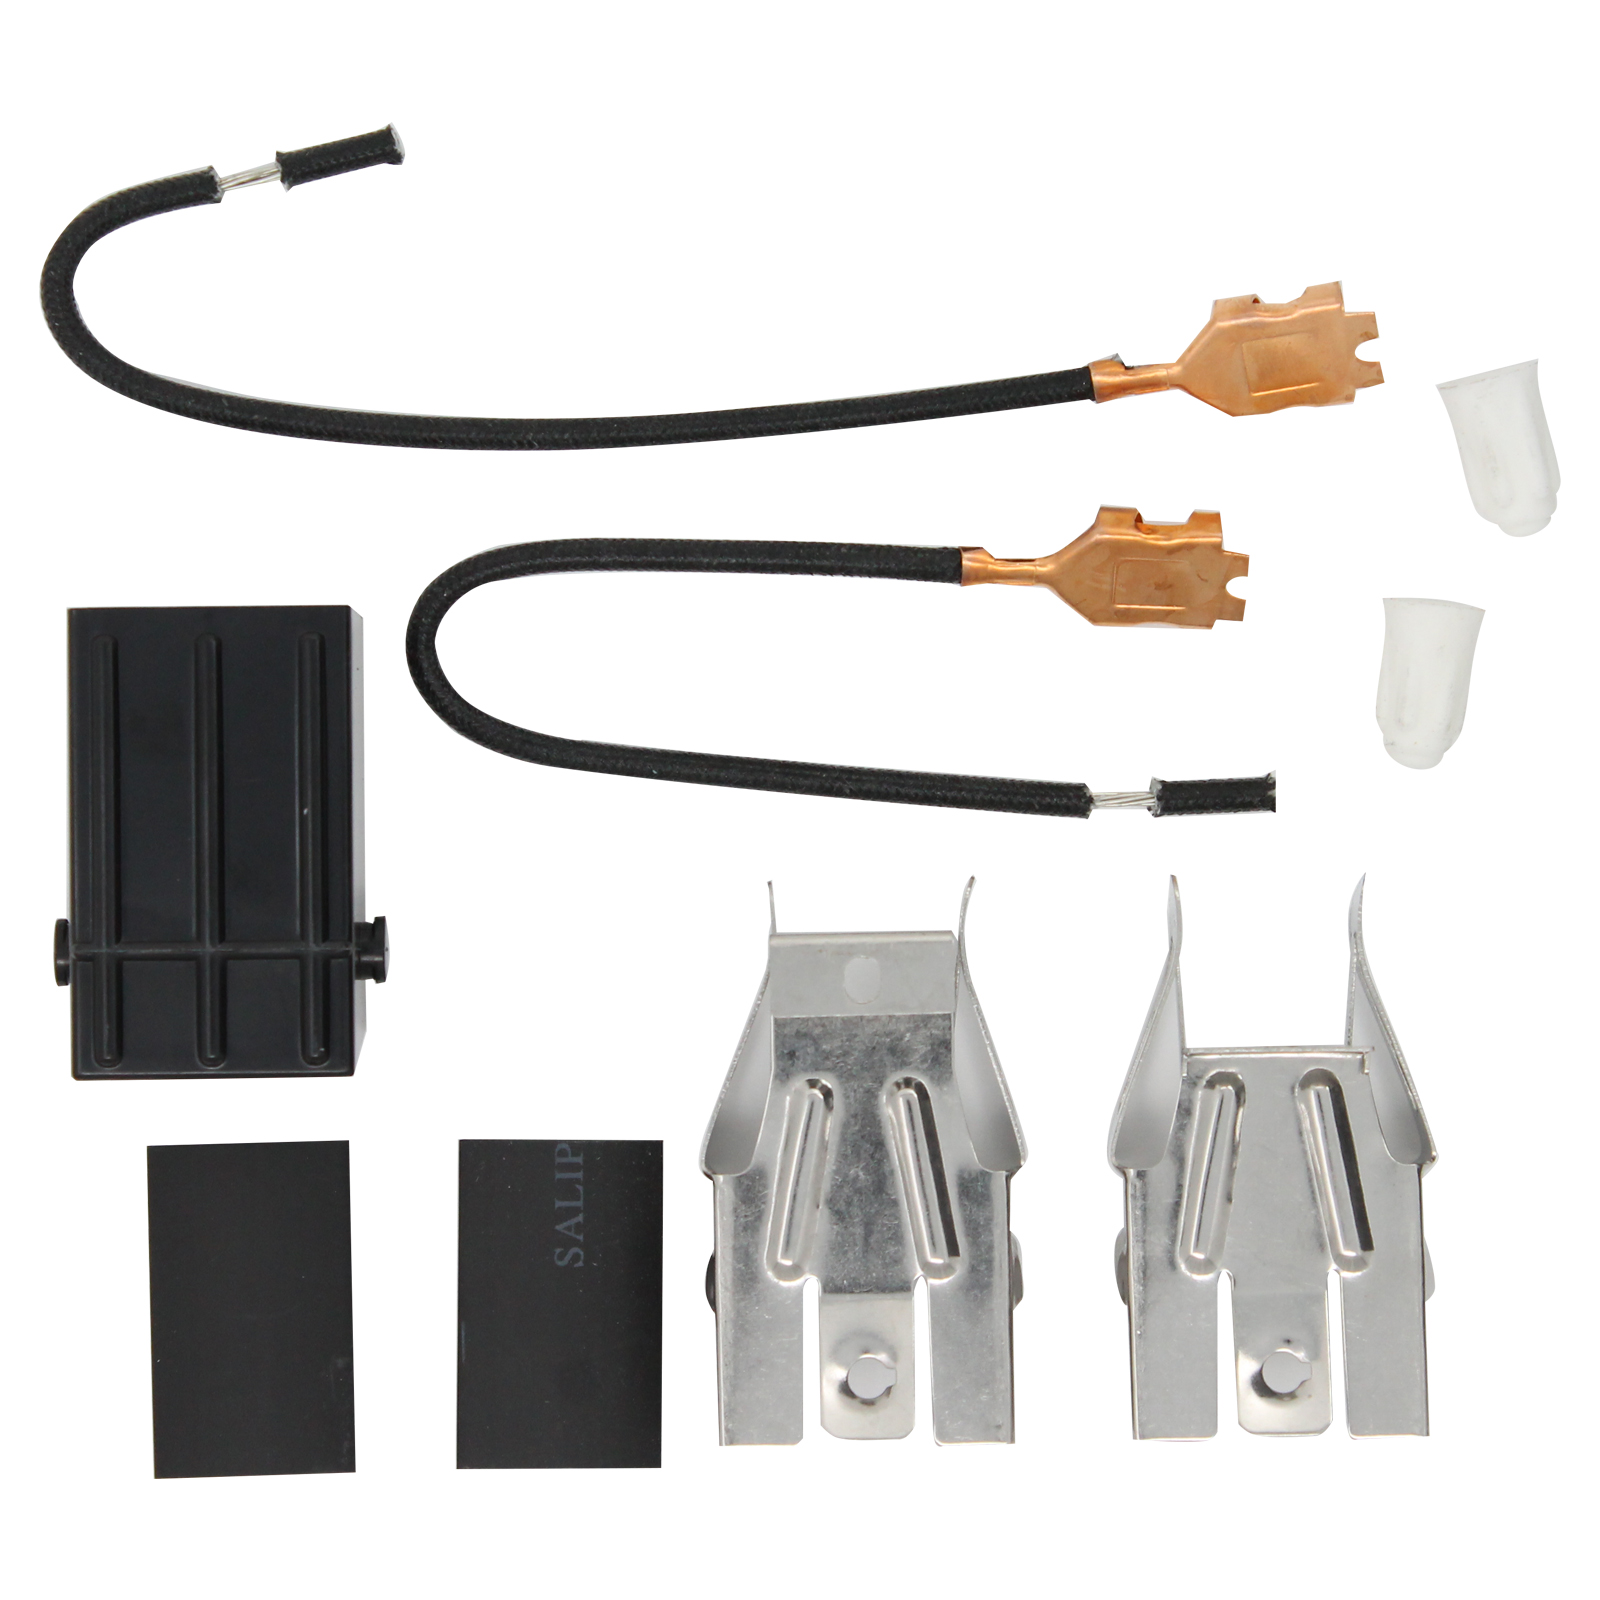 330031 Top Burner Receptacle Kit Replacement for Amana 631.003 Range/Cooktop/Oven - Compatible with 330031 Range Burner Receptacle Kit - UpStart Components Brand - image 2 of 4